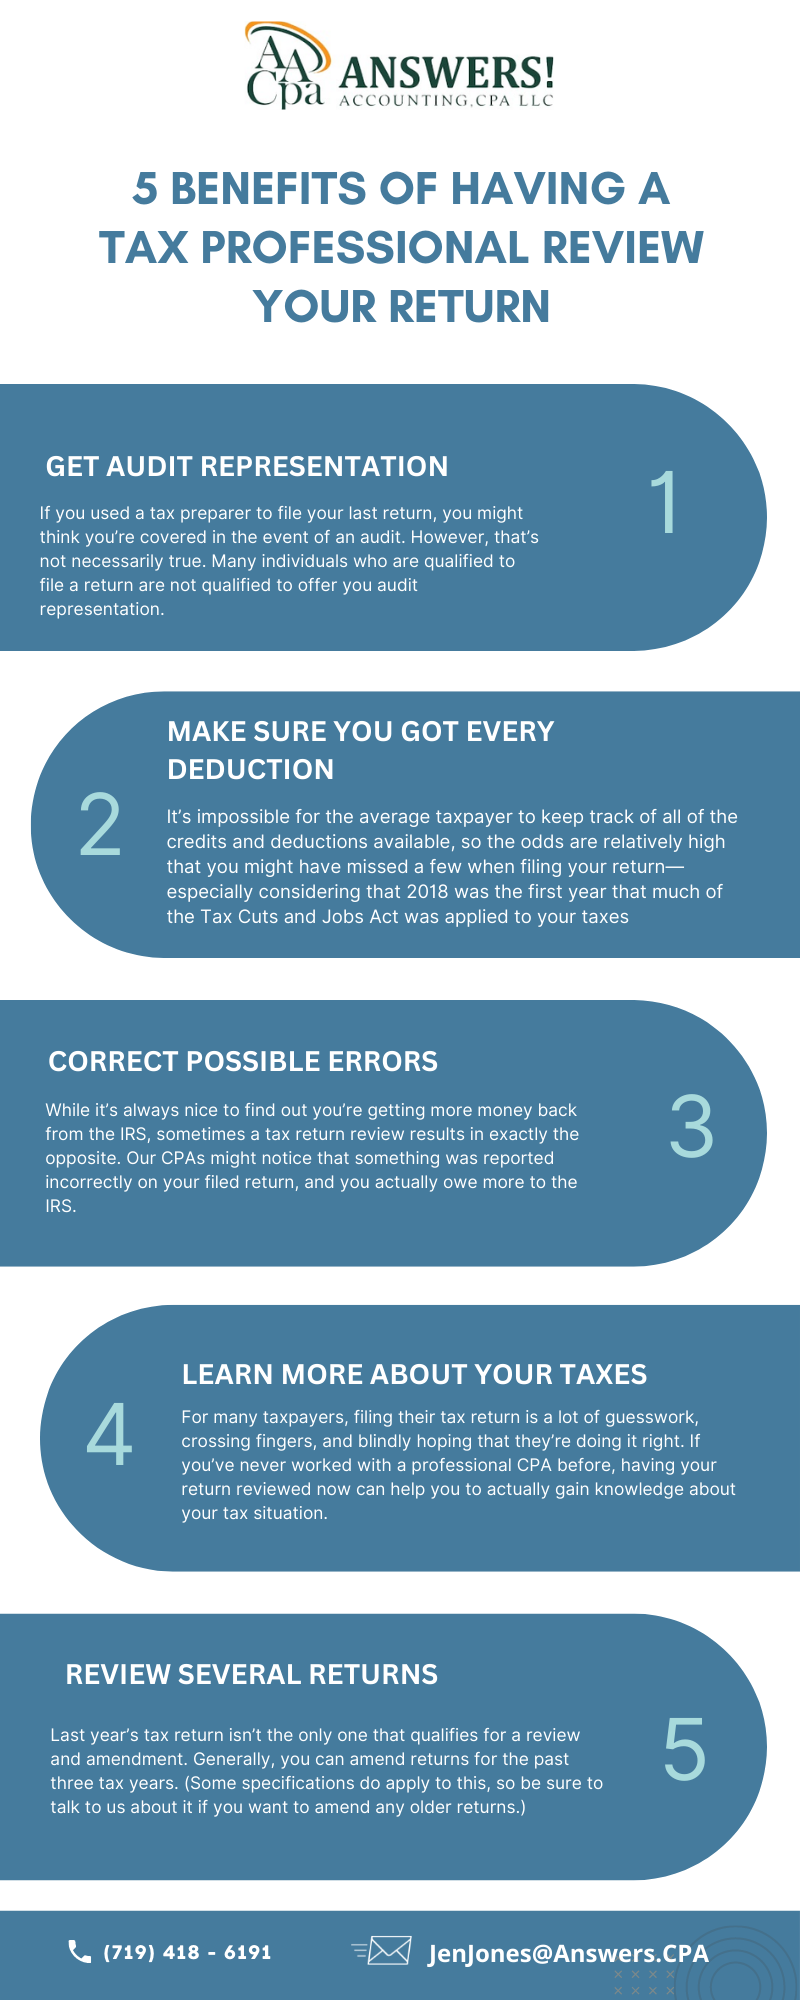 5 Benefits of having a Tax Professional for Your Returns